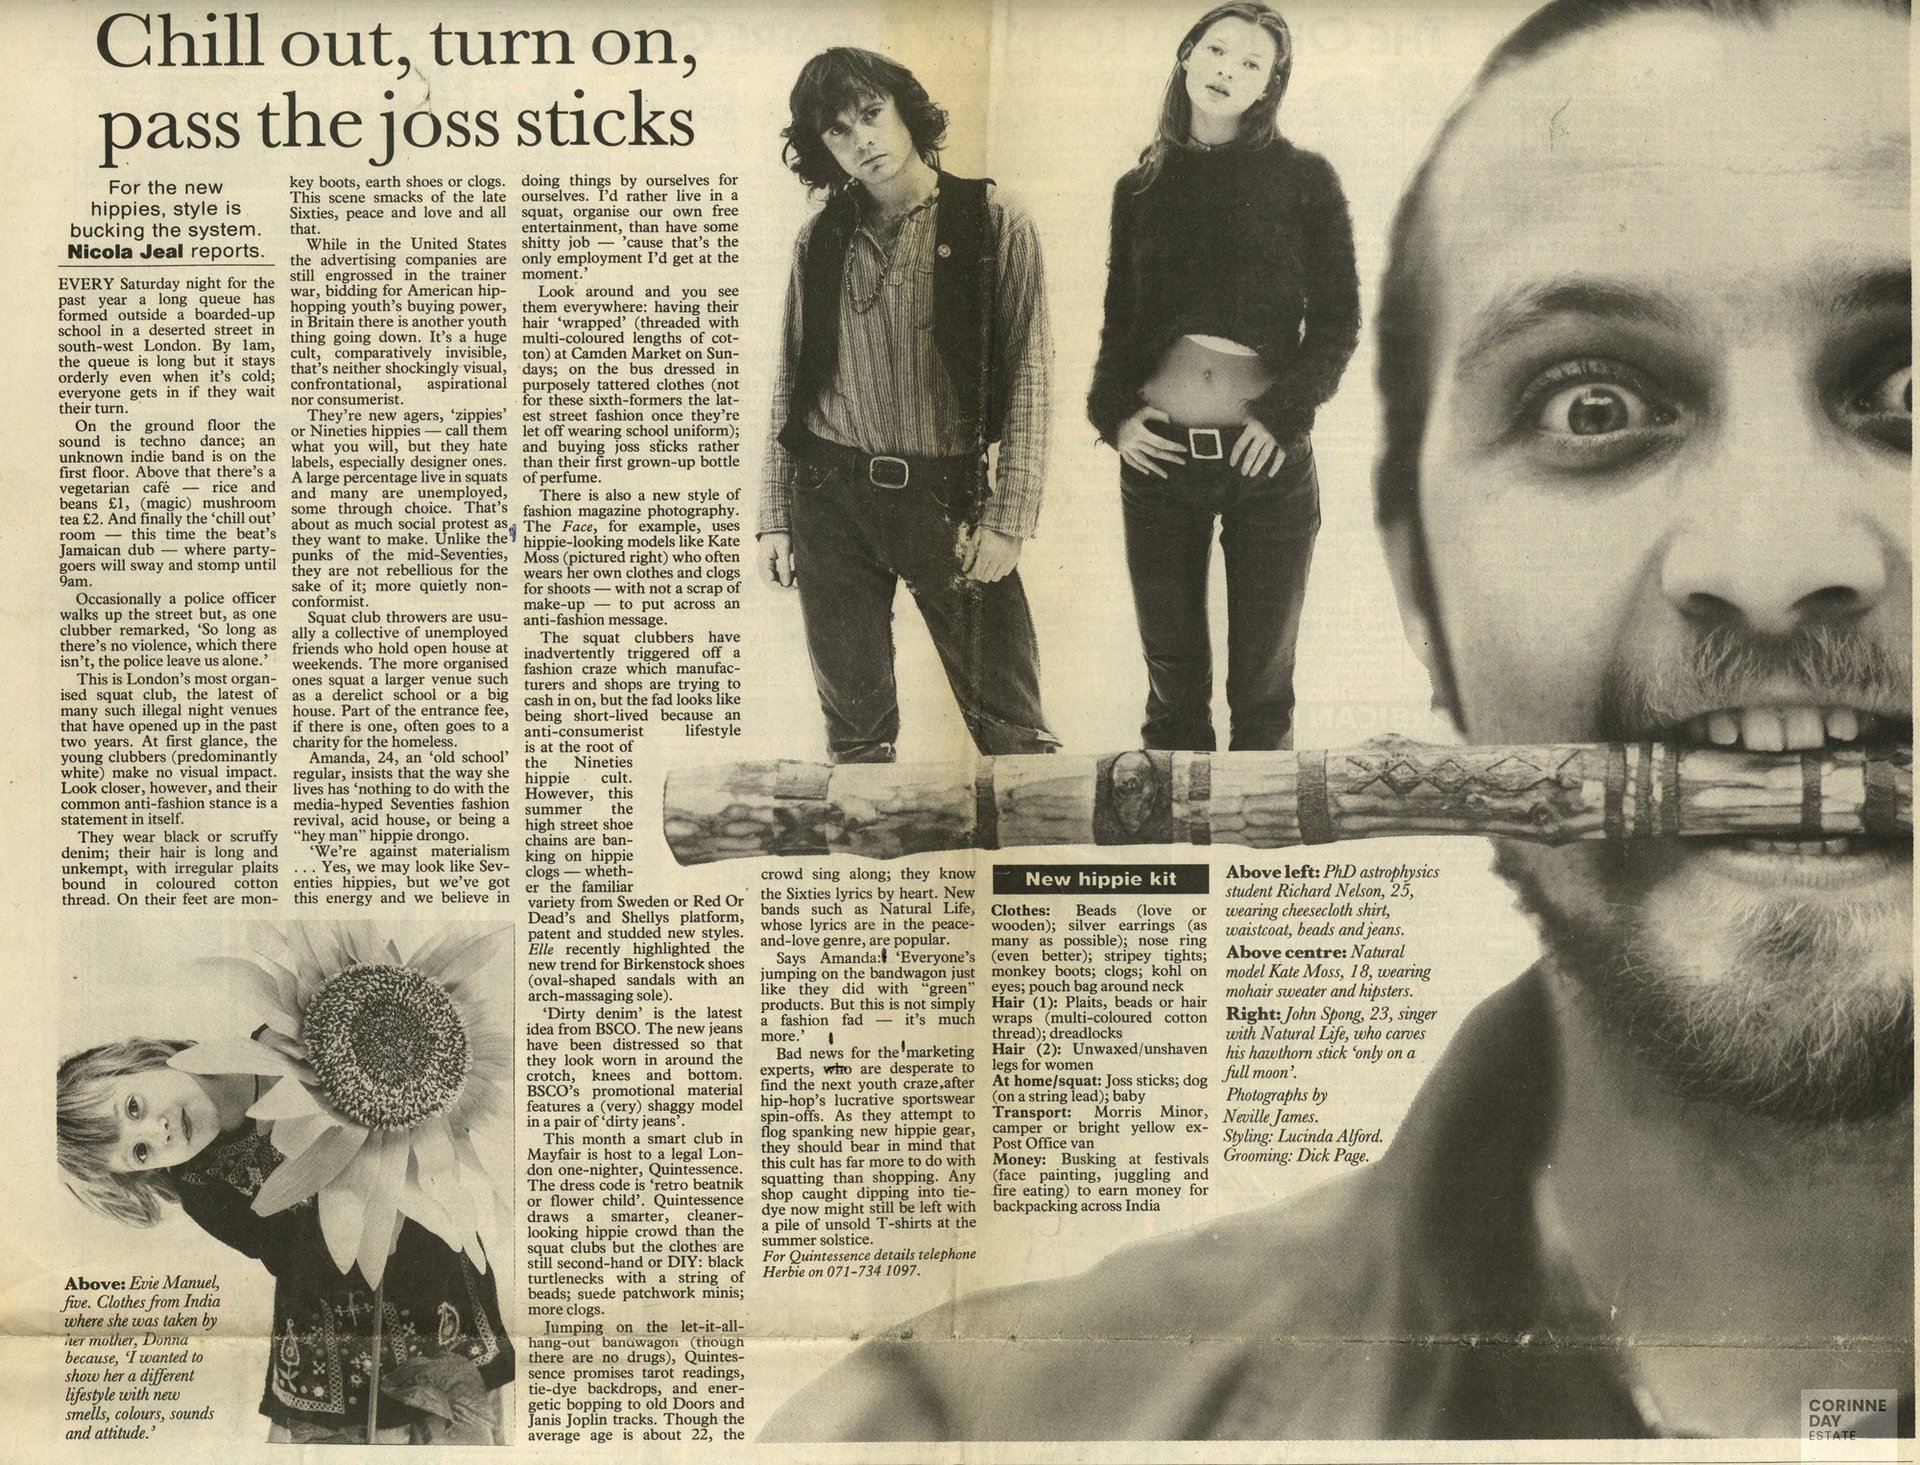 Chill out, turn on, pass the joss sticks, The Observer Sunday, 5 Apr 1992 — Image 1 of 1